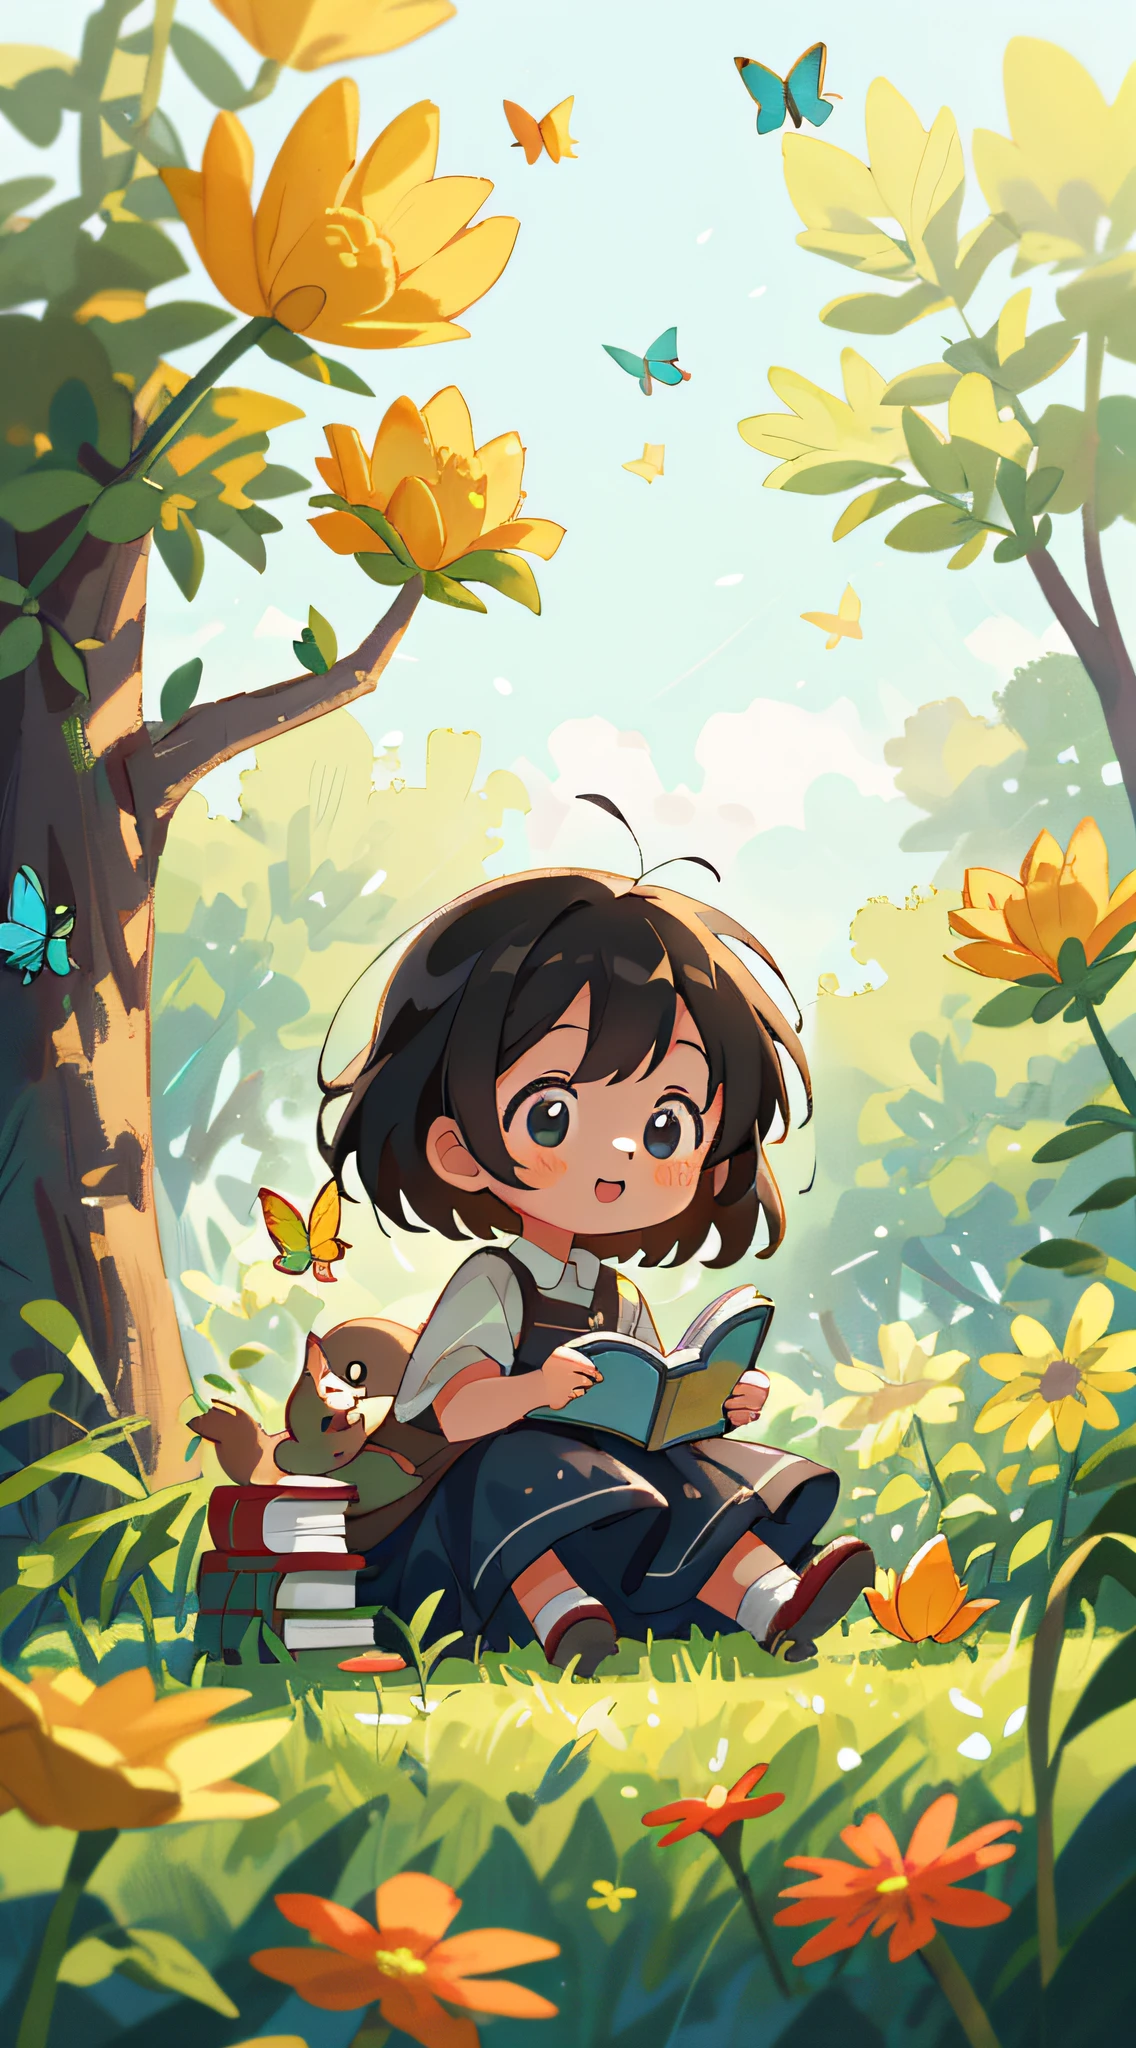 High Detail, Ultra Detail, 8K, Ultra High Resolution A cute and innocent girl, , toddler, enjoying her time in the open field, surrounded by the beauty of nature, warm sun sprinkling on her, wildflowers gently swaying in the breeze. Butterflies and birds flutter around her, adding to the playful atmosphere, surrounded by books